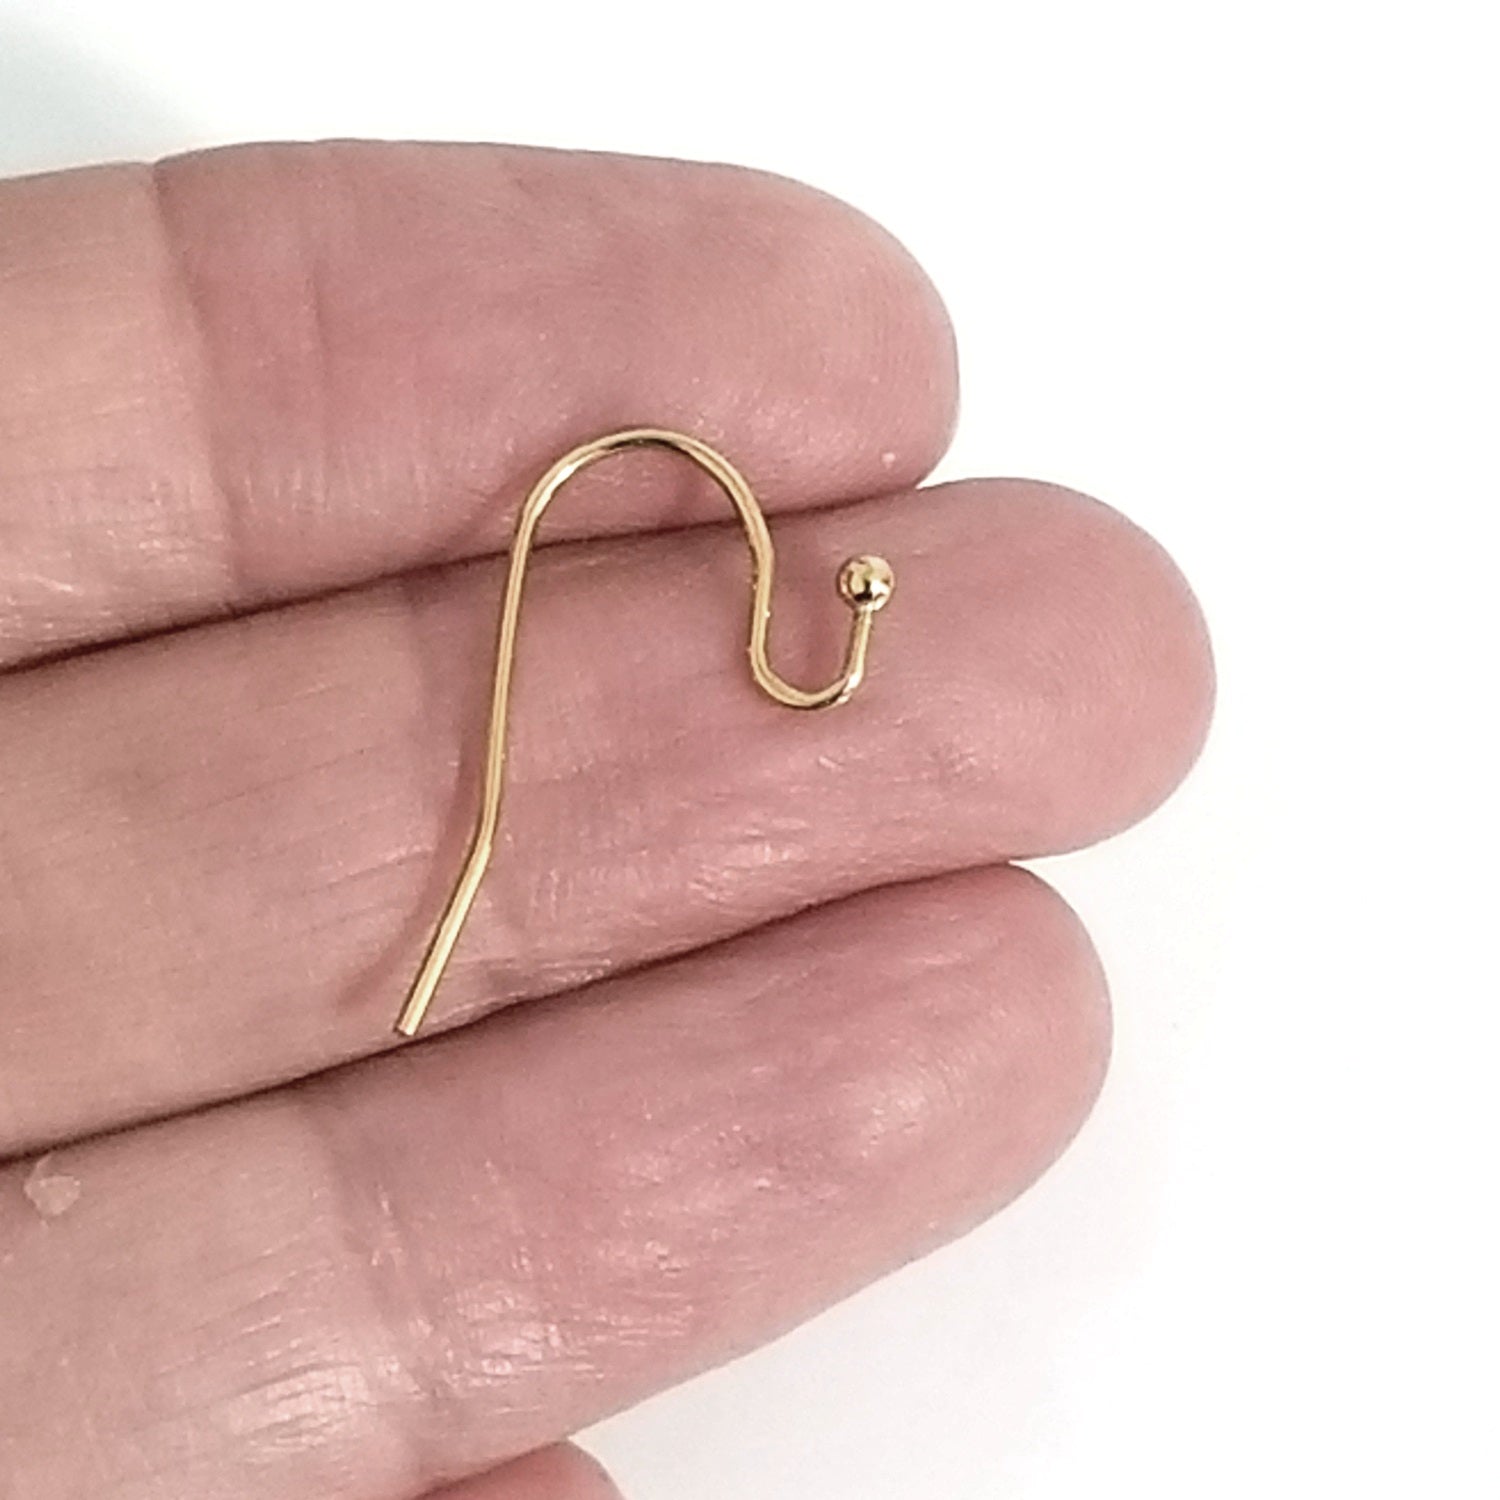 Tarnish Resistant 304-stainless Steel Earring Hooks (10 Pieces) 17x15x2 Mm  Gold Color For Jewellery Making at Rs 120.00/piece, Peelamedu, Coimbatore